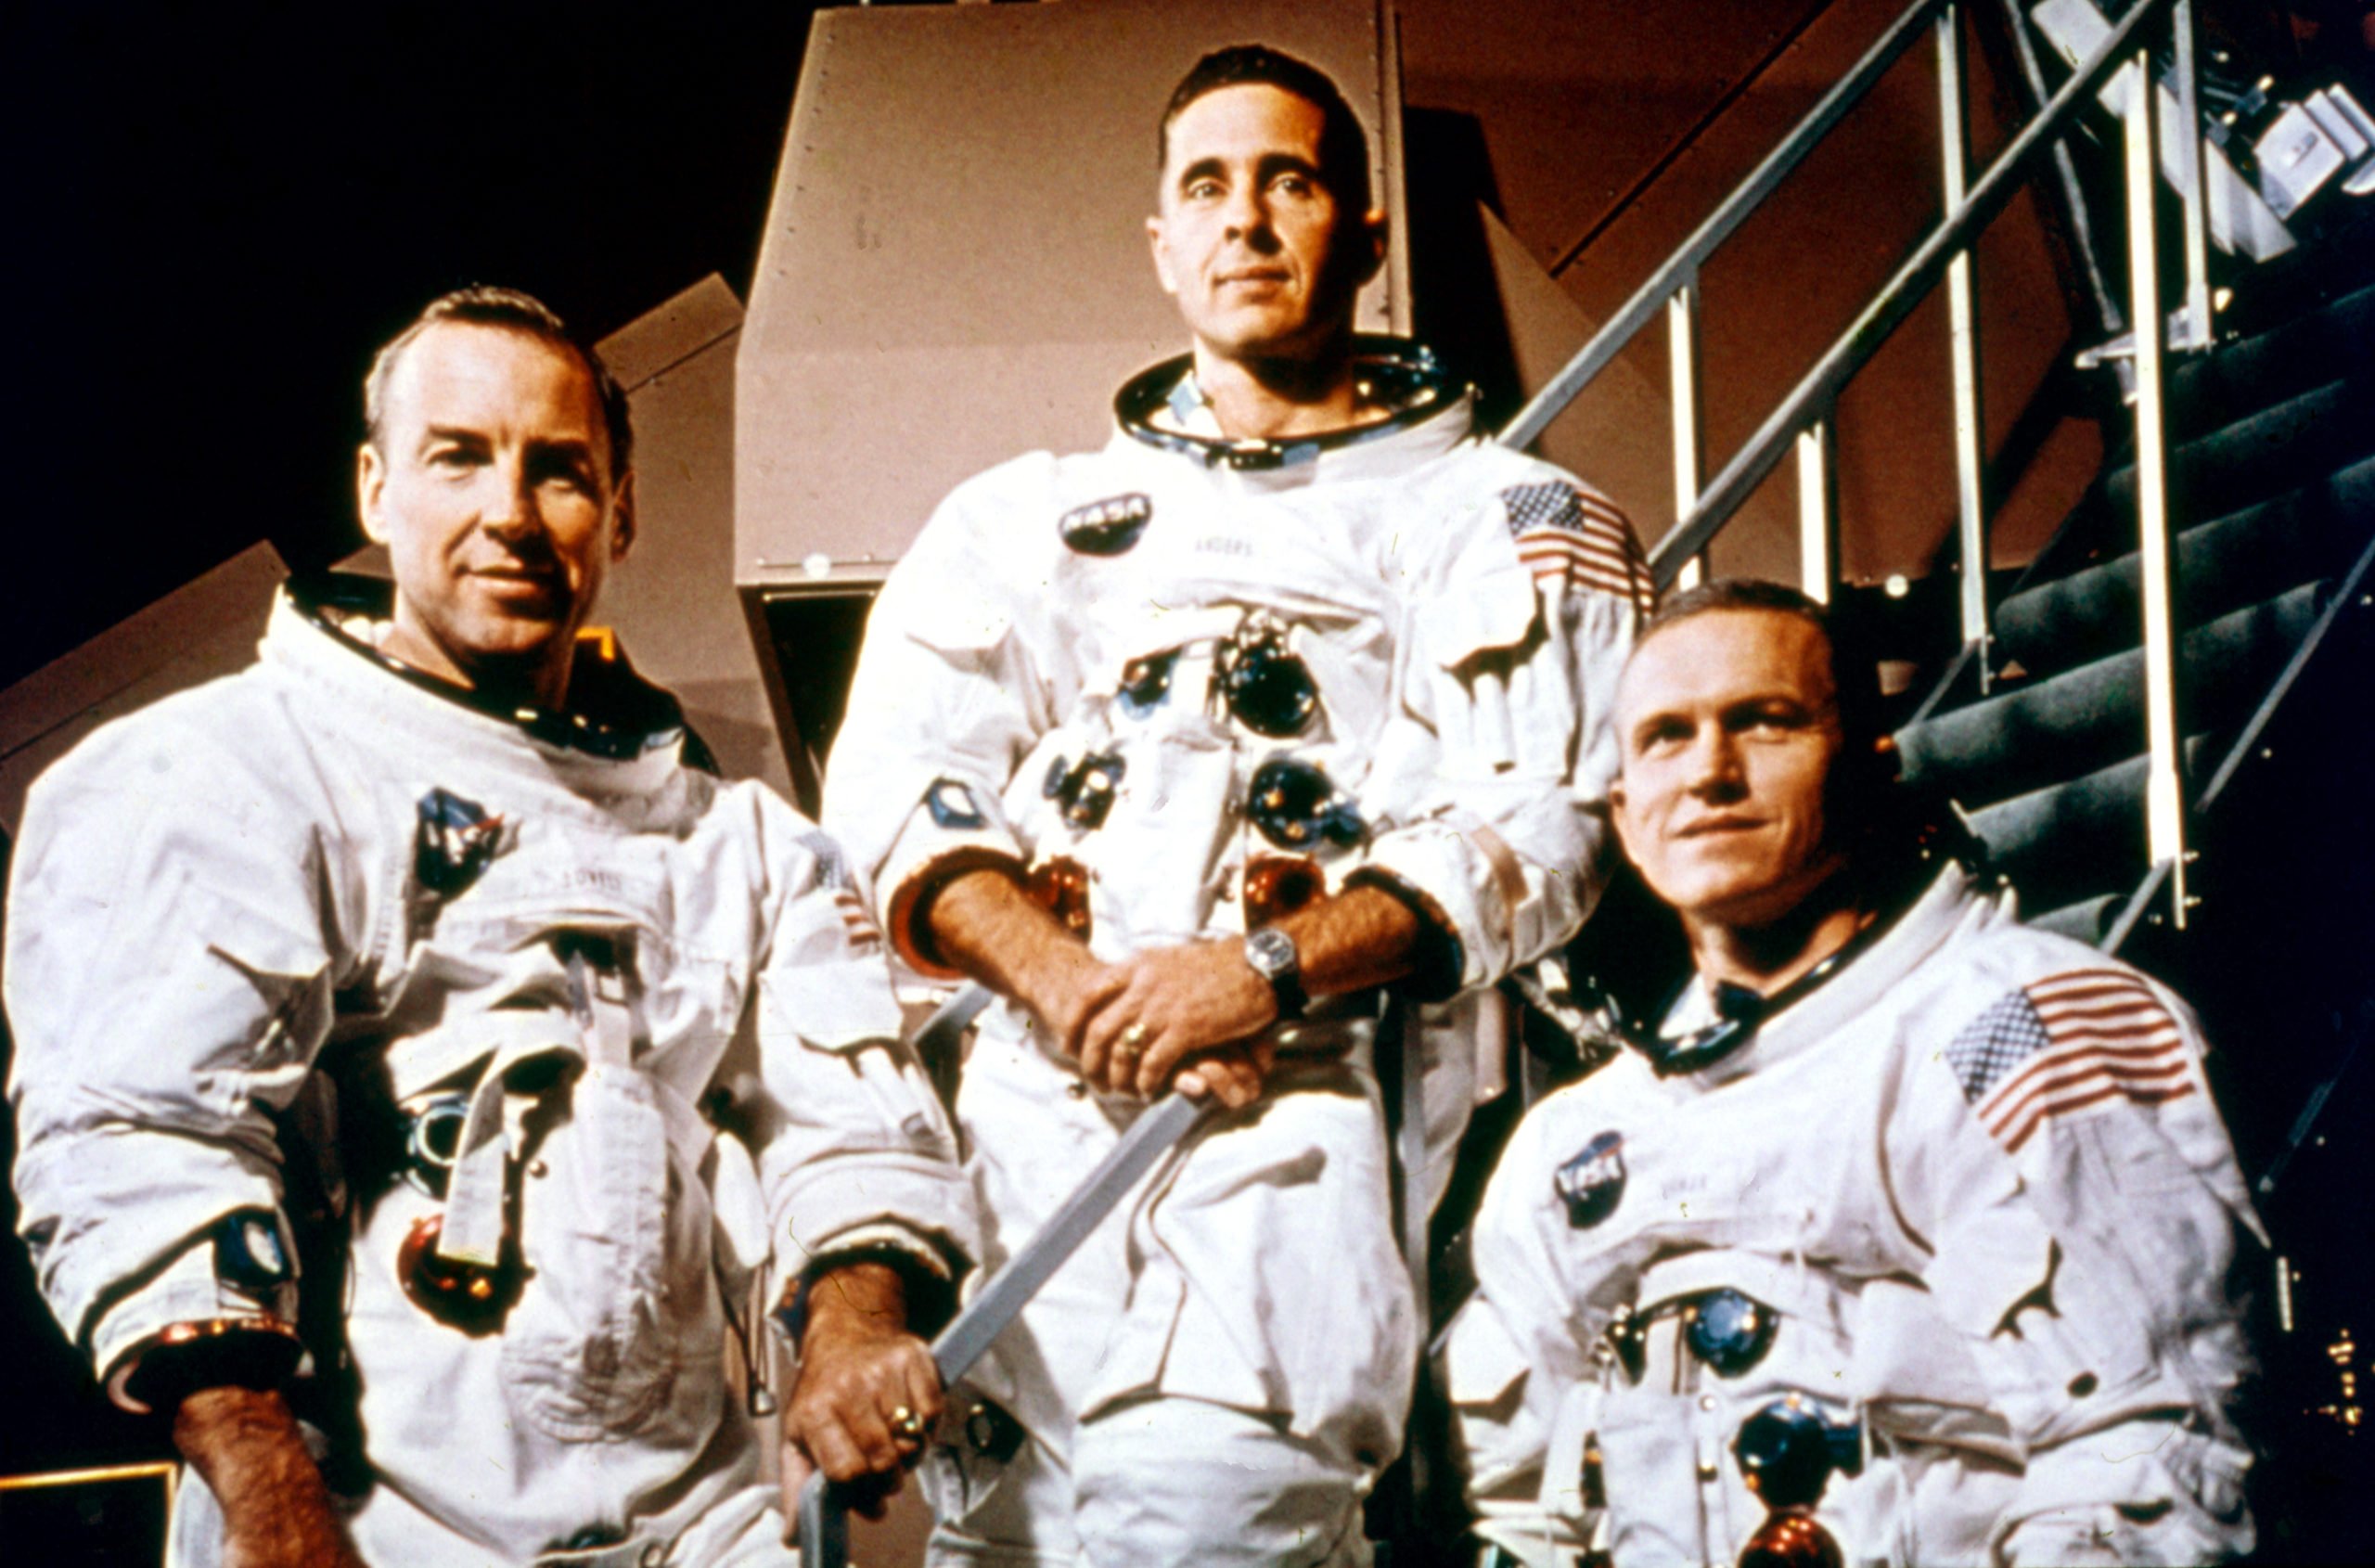 Portrait of the crew of NASA's Apollo 8, Florida, December 1968. Pictured are, from left, command module pilot James Lovell, lunar module pilot William Anders, and Commander Frank Borman. (Photo by NASA/Interim Archives/Getty Images)